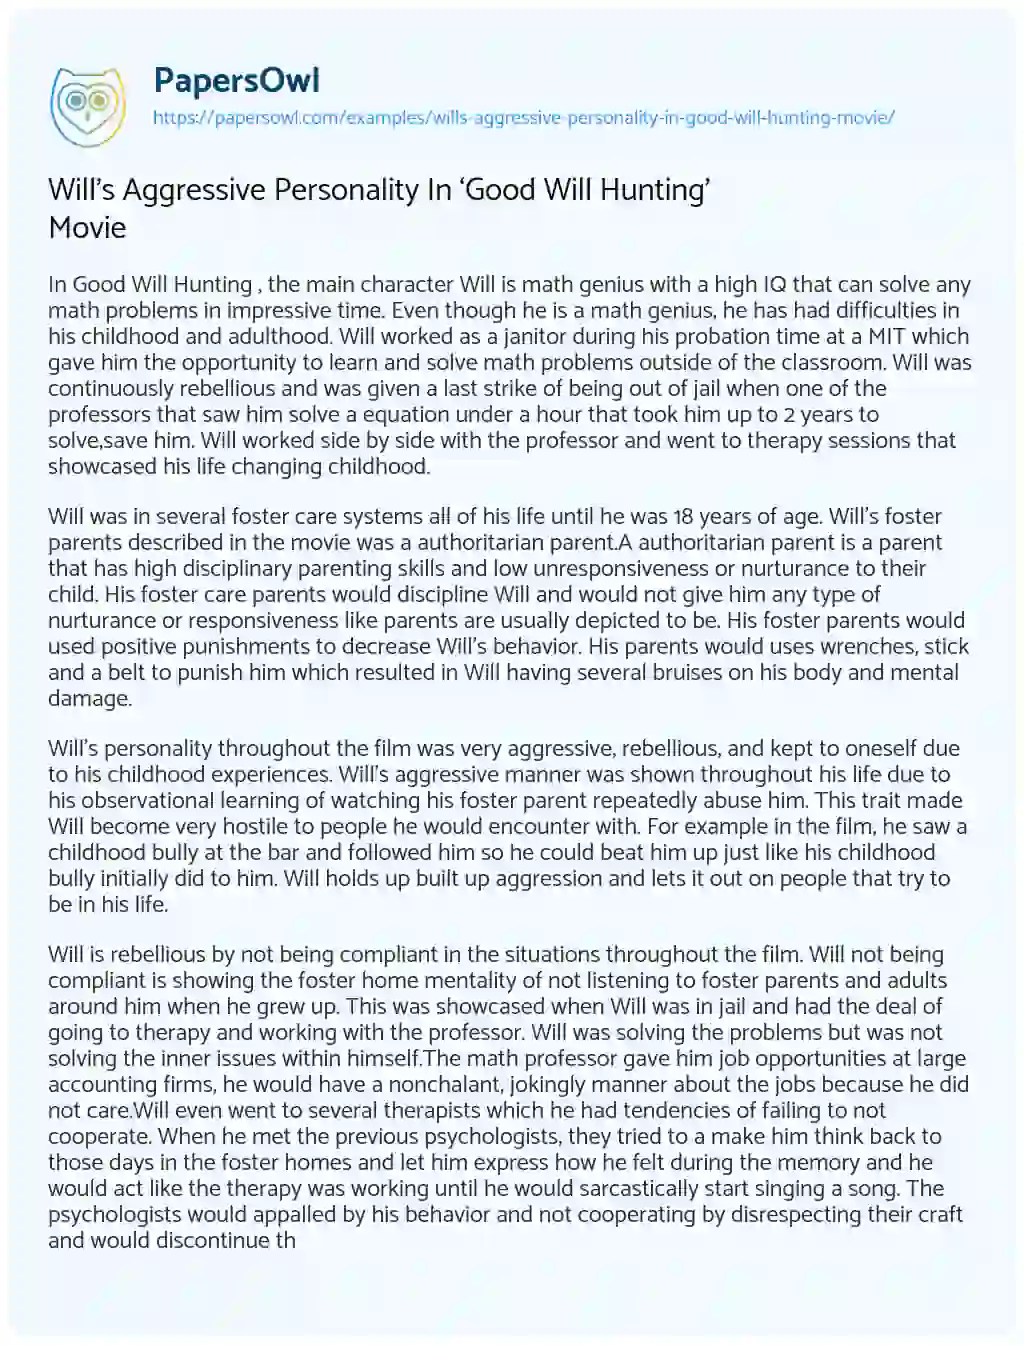 Essay on Will’s Aggressive Personality in ‘Good Will Hunting’ Movie